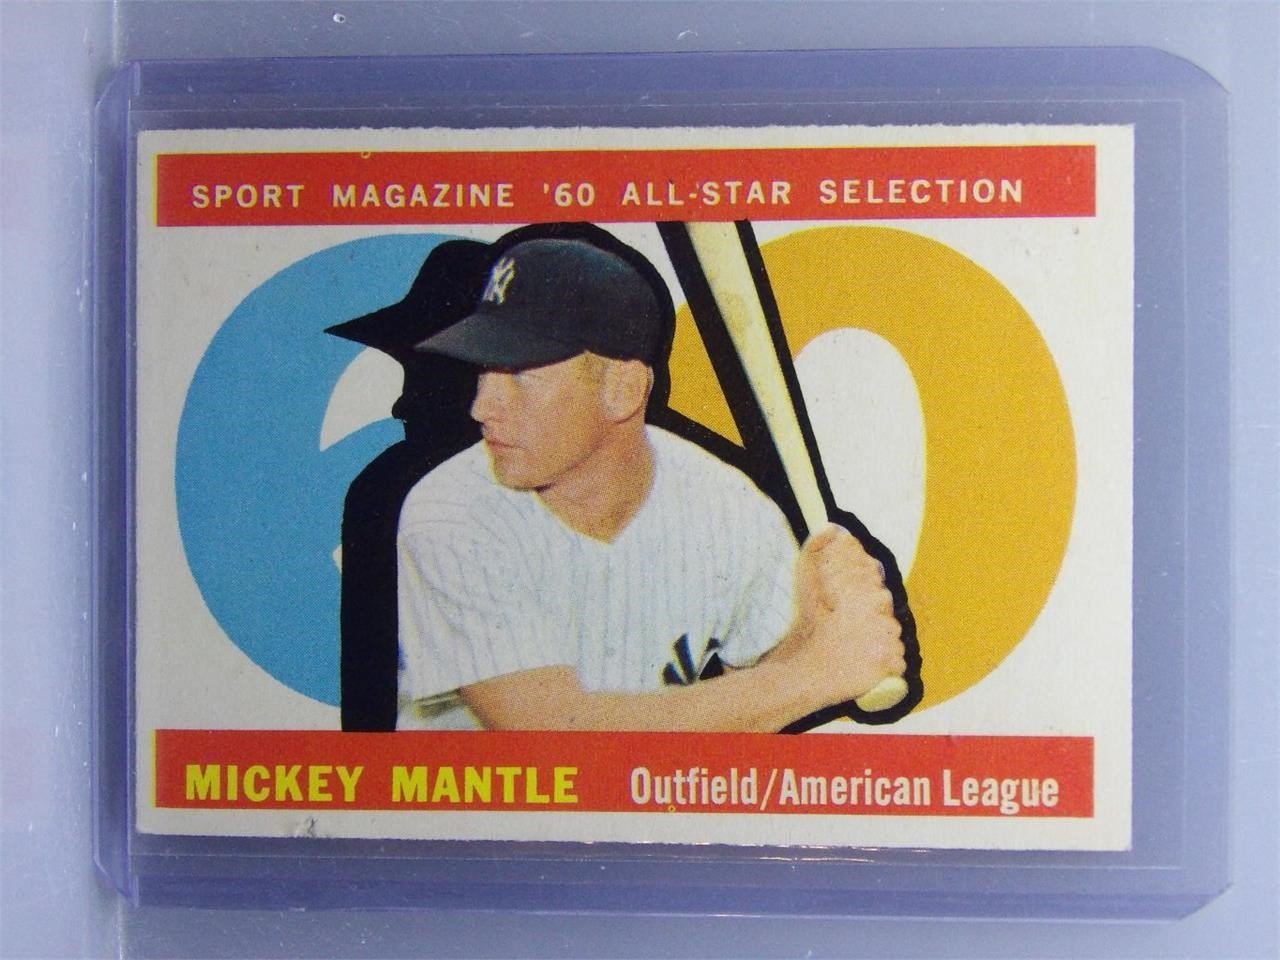 Vintage Sports Card Auctions - Closes May 5th at 7:00 Cent